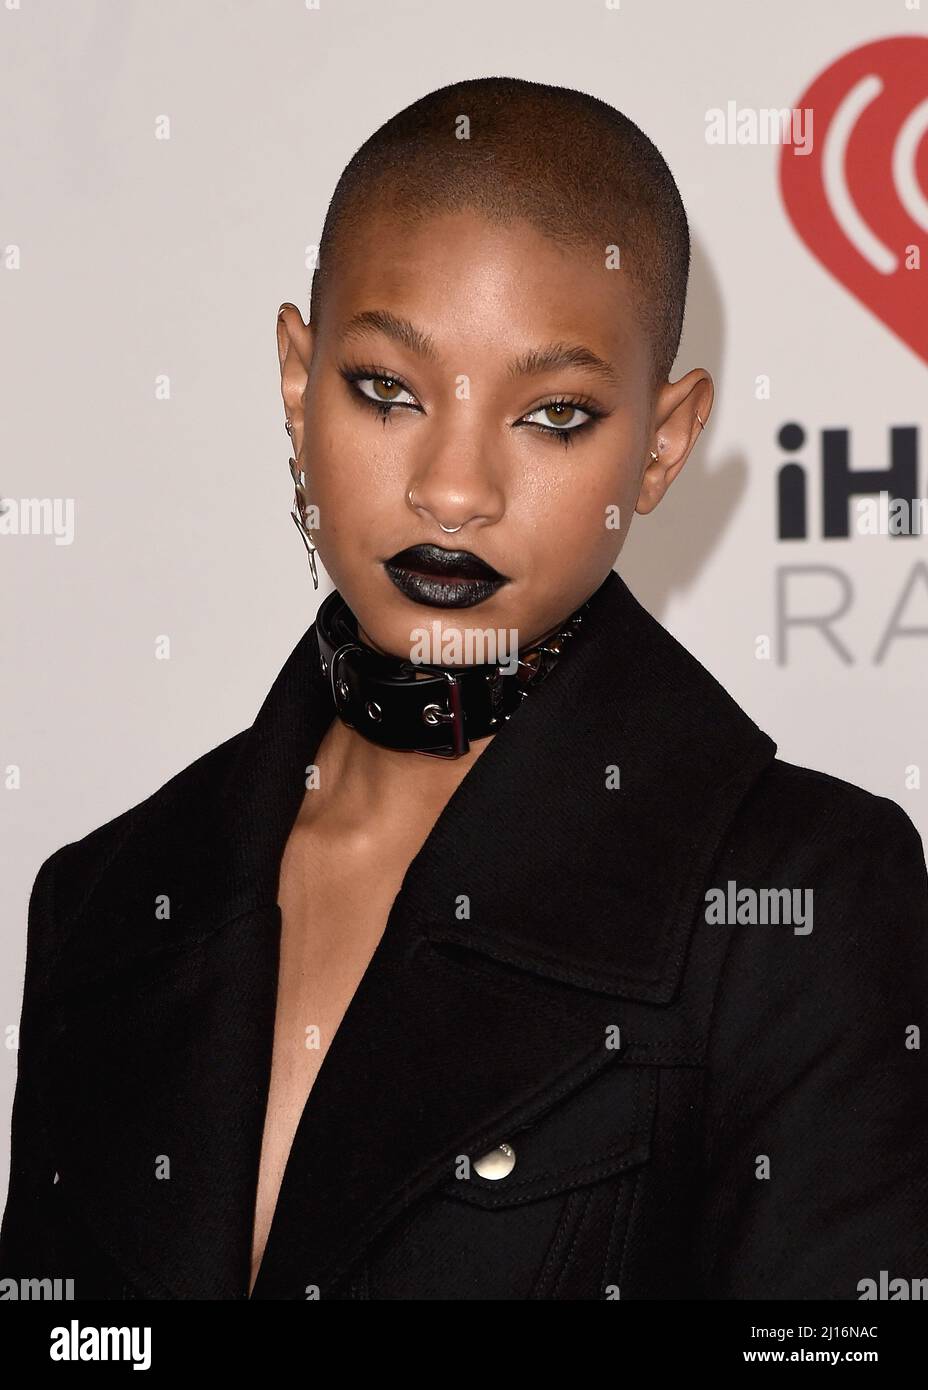 2022 IHEARTRADIO MUSIC AWARDS: Willow Smith at the 2021 “iHeartRadio Music Awards” airing live from The Shrine Auditorium in Los Angeles, Tuesday, March 22 (8:00-10:00 PM ET Live/PT tape-delayed) on FOX. CR: Scott Kirkland/PictureGroup/Sipa USA for FOX. Credit: 2022 FOX MEDIA, LLC. Credit: Sipa USA/Alamy Live News Stock Photo